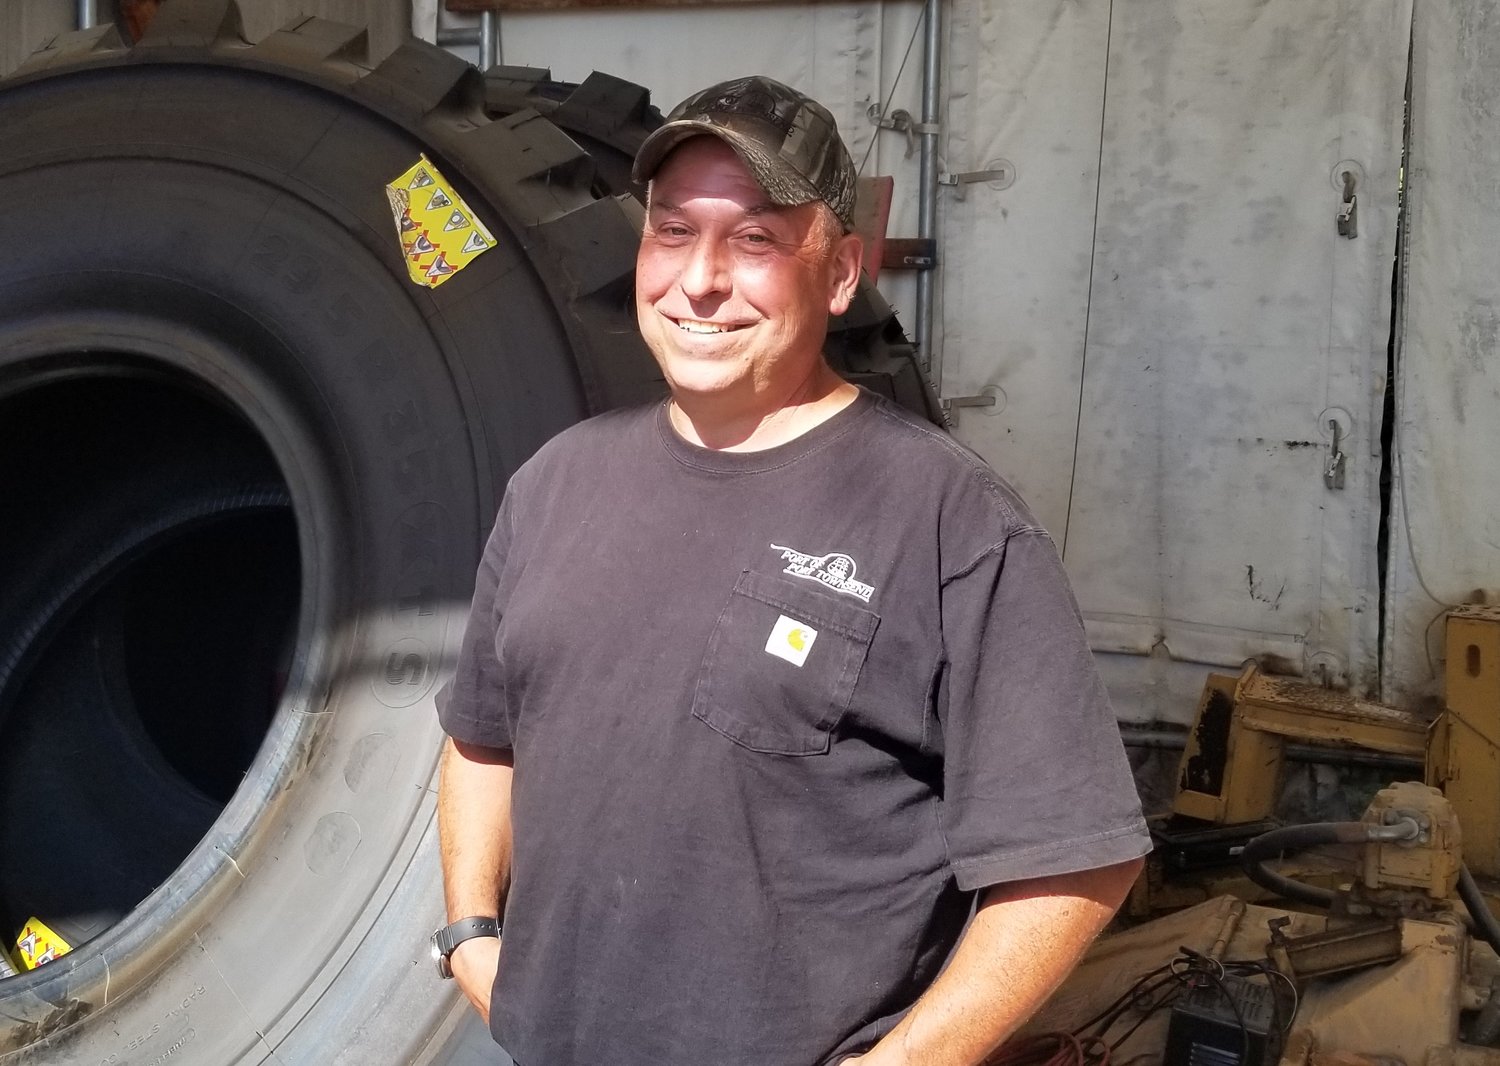 As the lead mechanic for the Port of Port Townsend, Shawn Wiles, is in charge of keeping the Port's 300 metric ton marine travel lift in working order